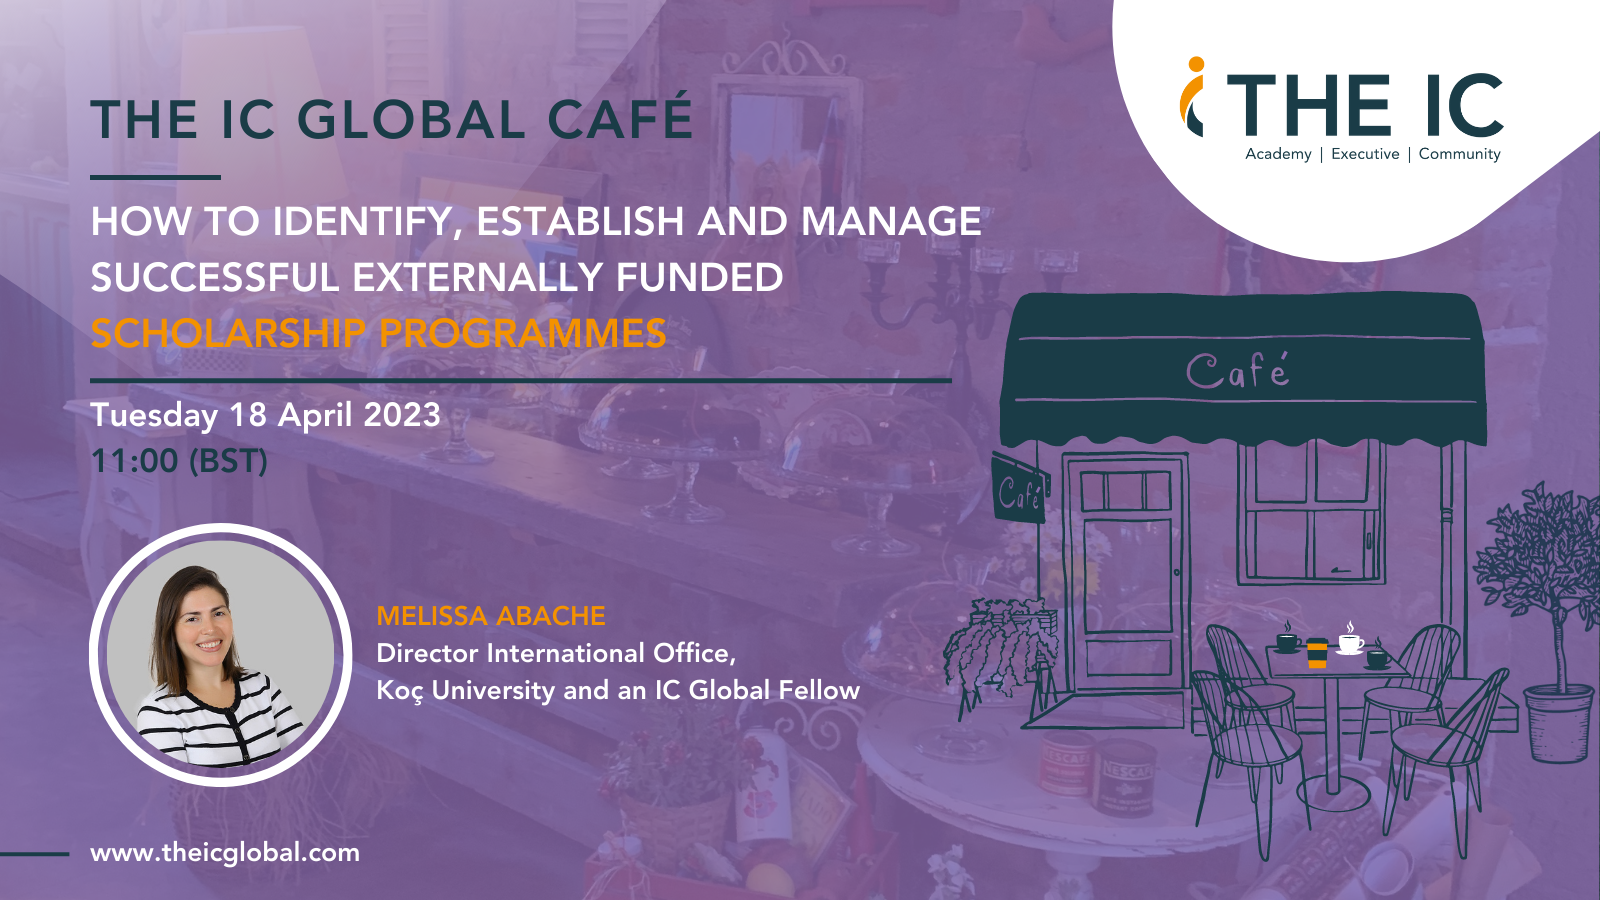 The IC Global Café: ‘How to identify, establish and manage successful externally funded scholarship programmes’